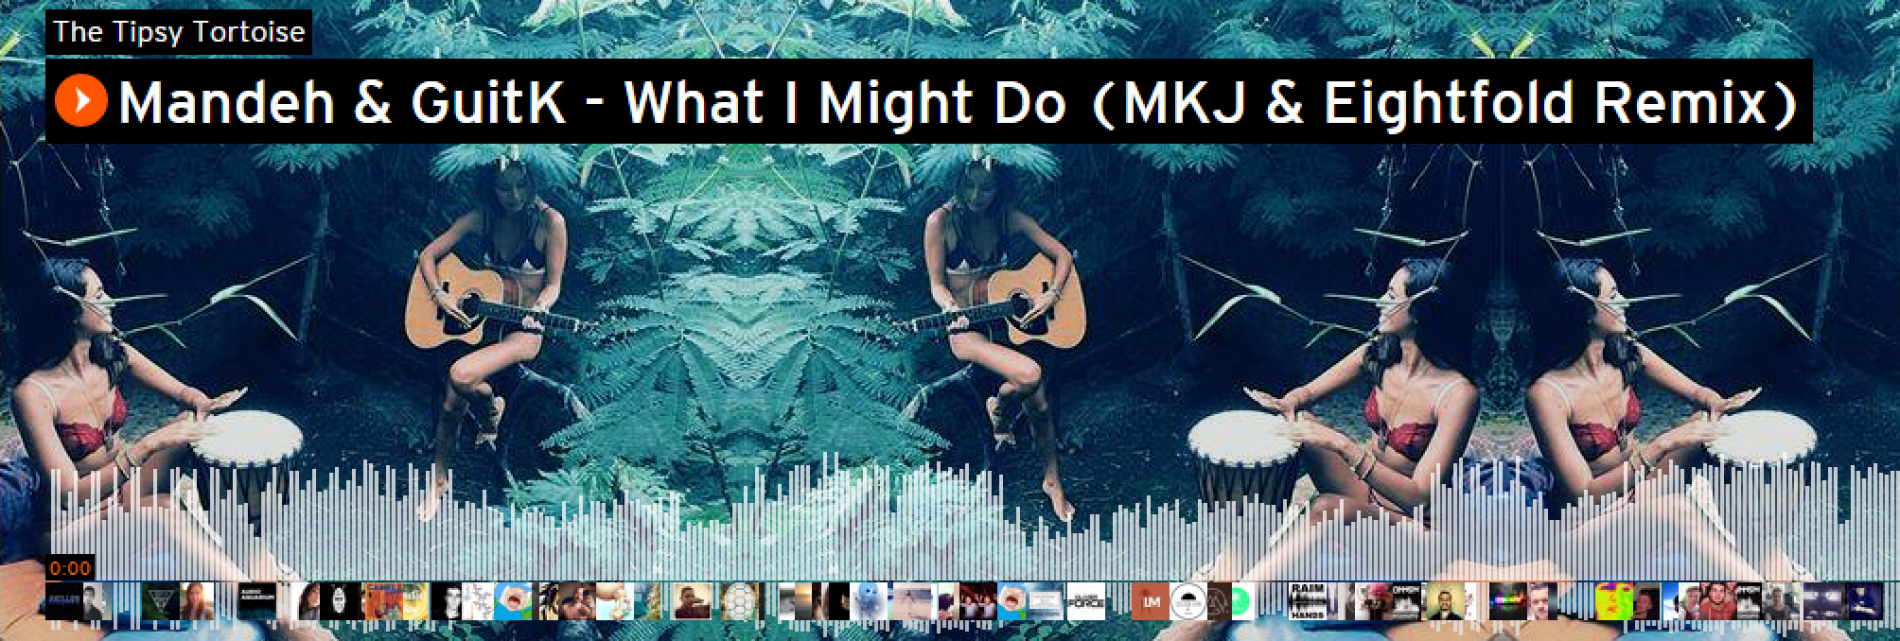 Mandeh & GuitK – What I Might Do (MKJ & Eightfold Remix)